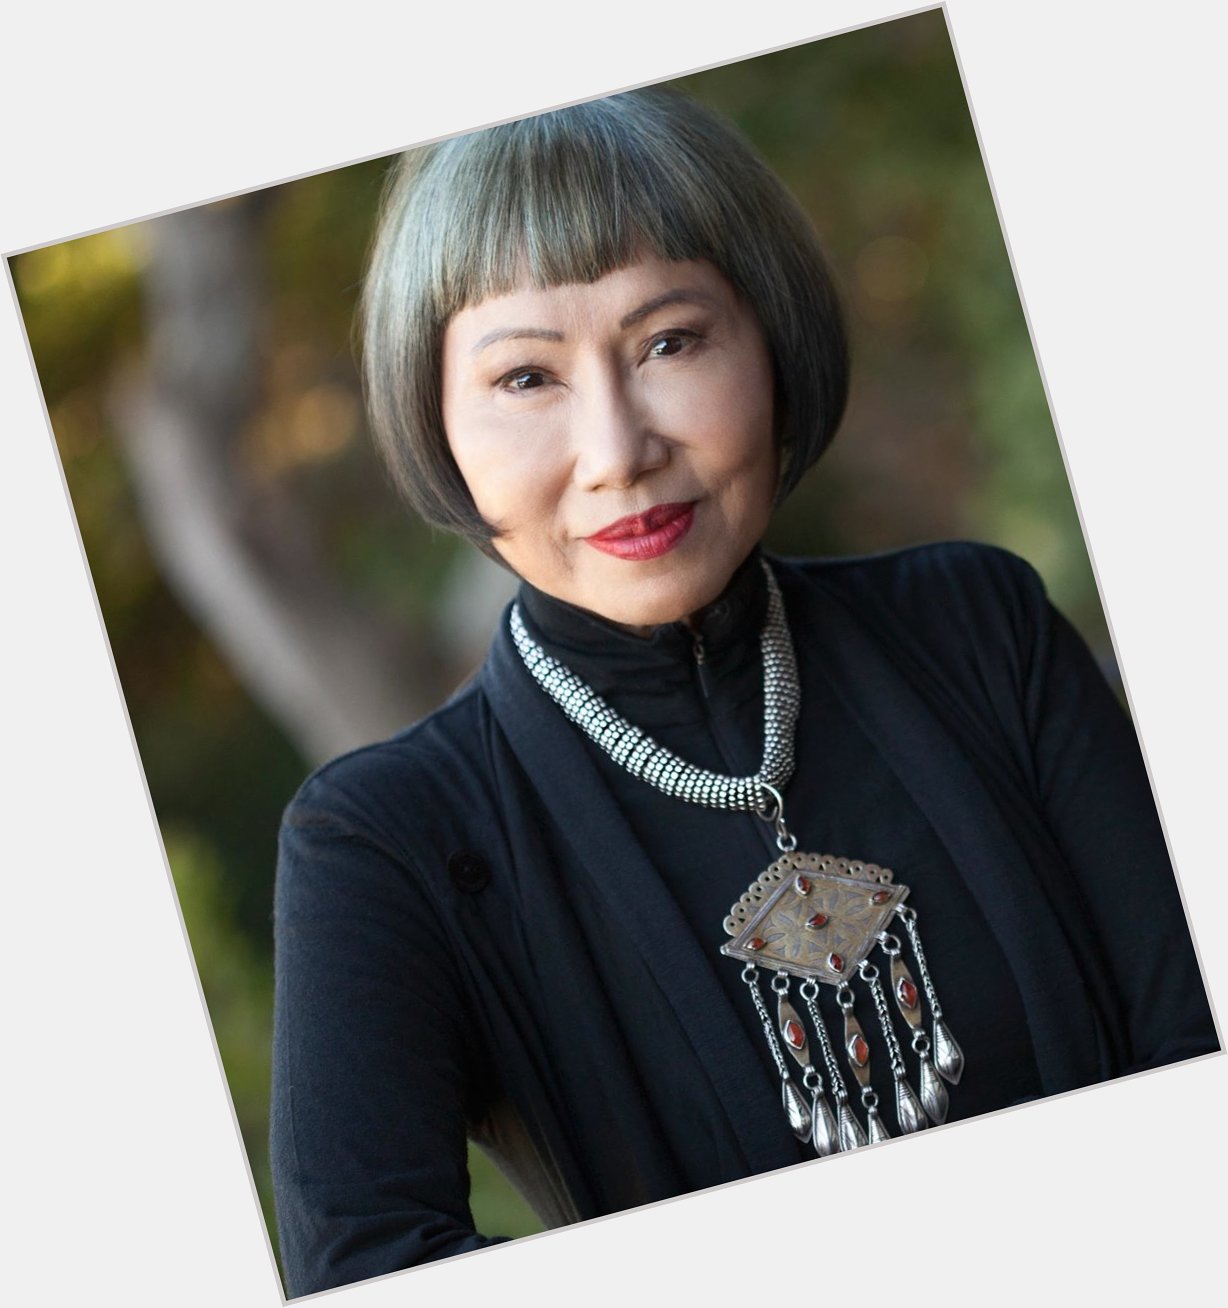 Happy birthday author, Amy Tan! You can check out her works from our collection. LINK:  